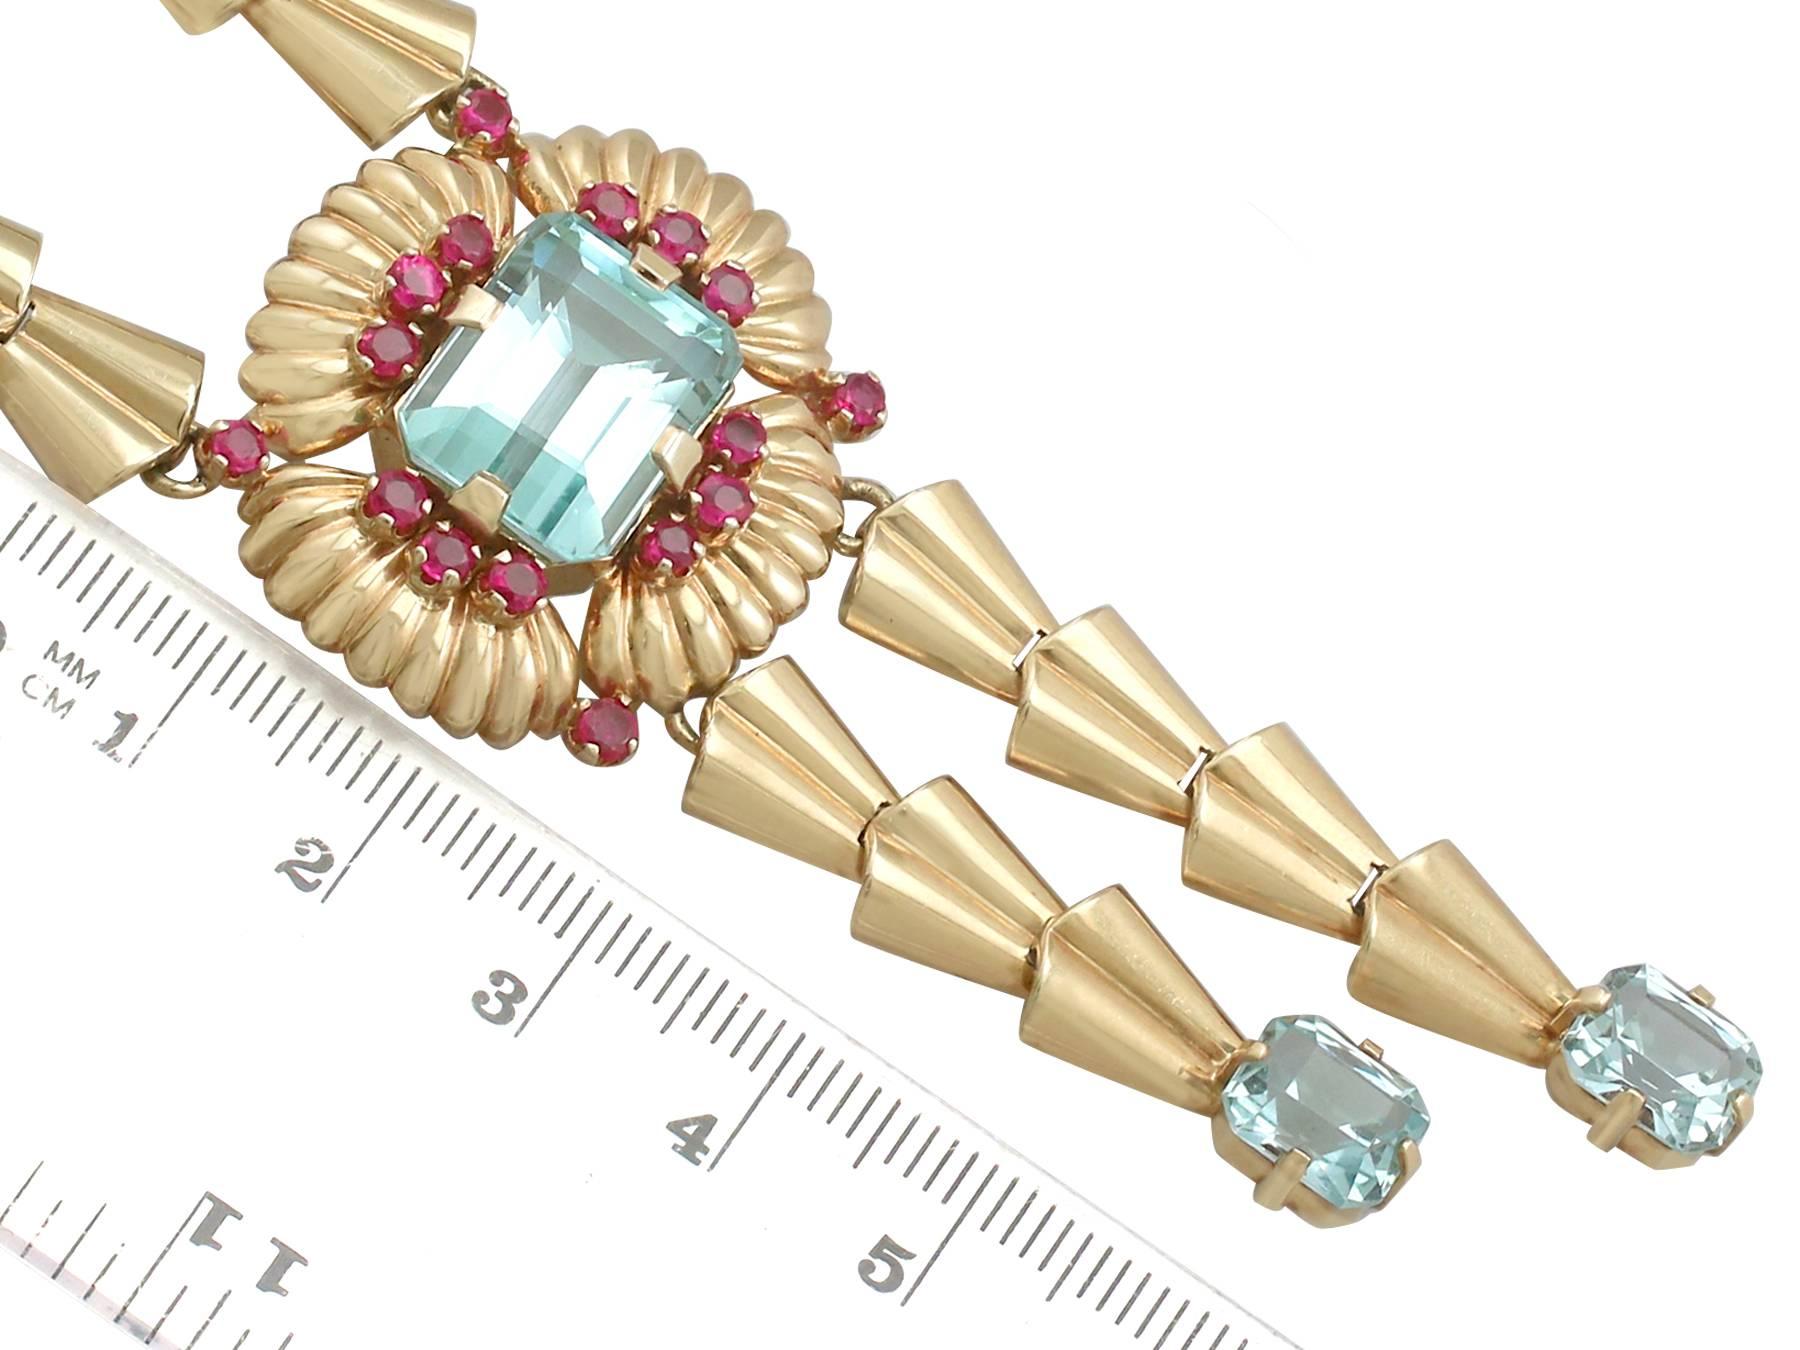 Women's 15.84 Carat Aquamarine and 1.28 Carat Ruby, Gold Necklace by Tiffany & Co.